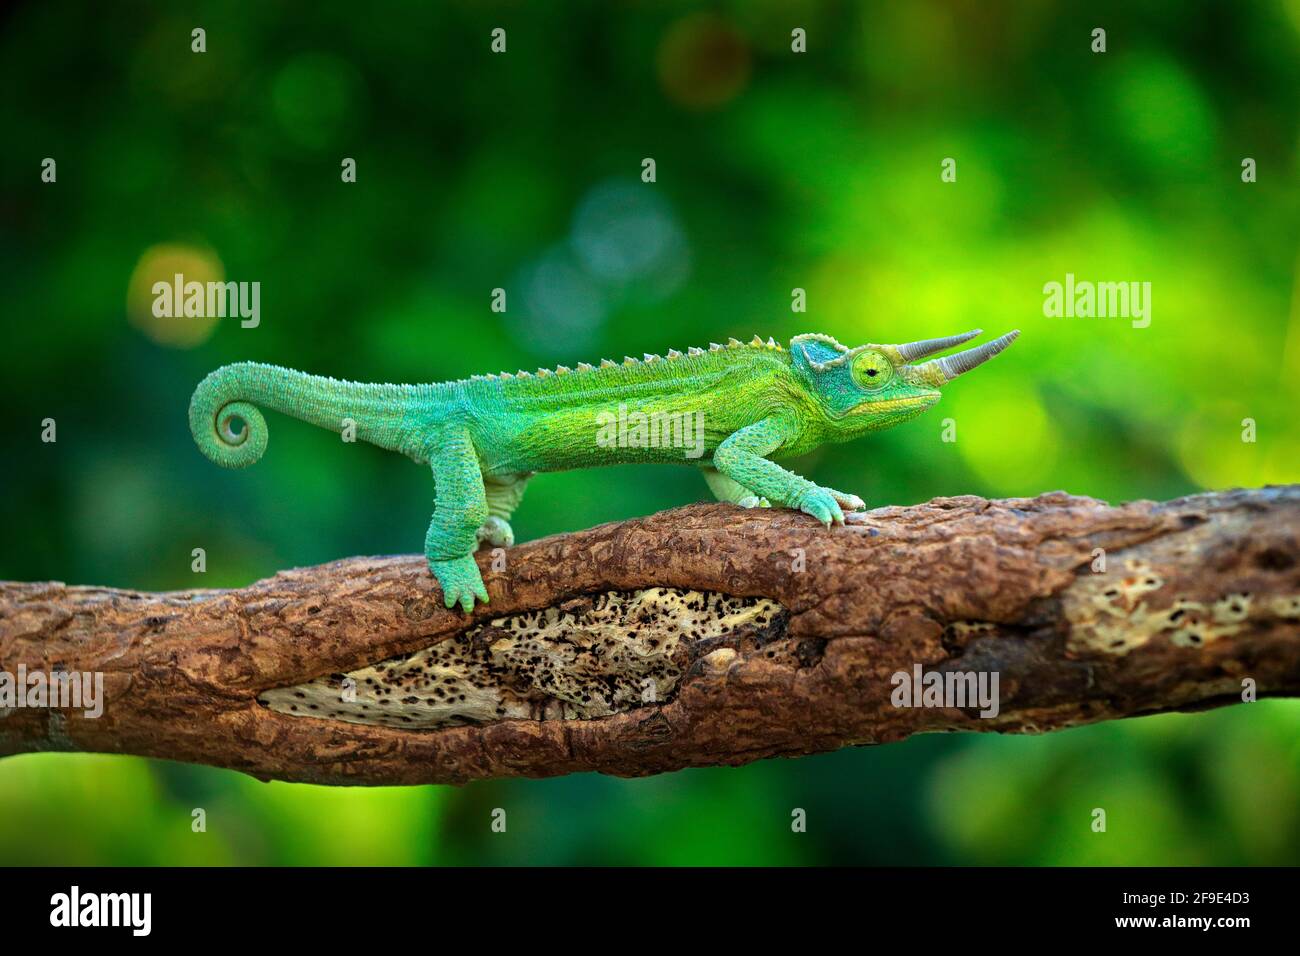 Jackson's Chameleon, Trioceros jacksonii, sitting on the branch in forest habitat. Exotic beautifull endemic green reptile with long tail from Madagas Stock Photo